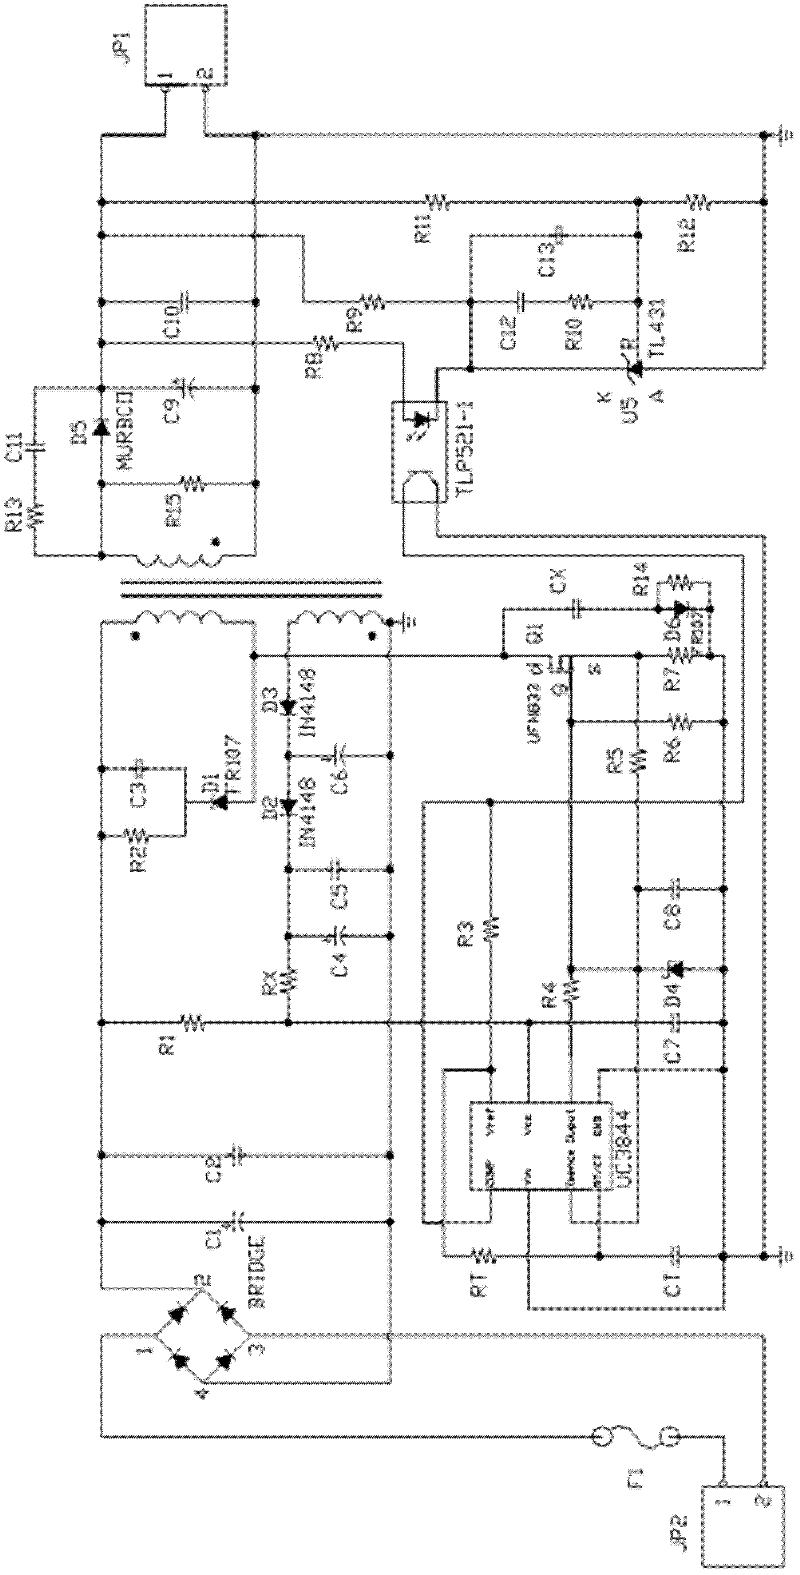 Single-circuit output flyback converter controlled in current mode